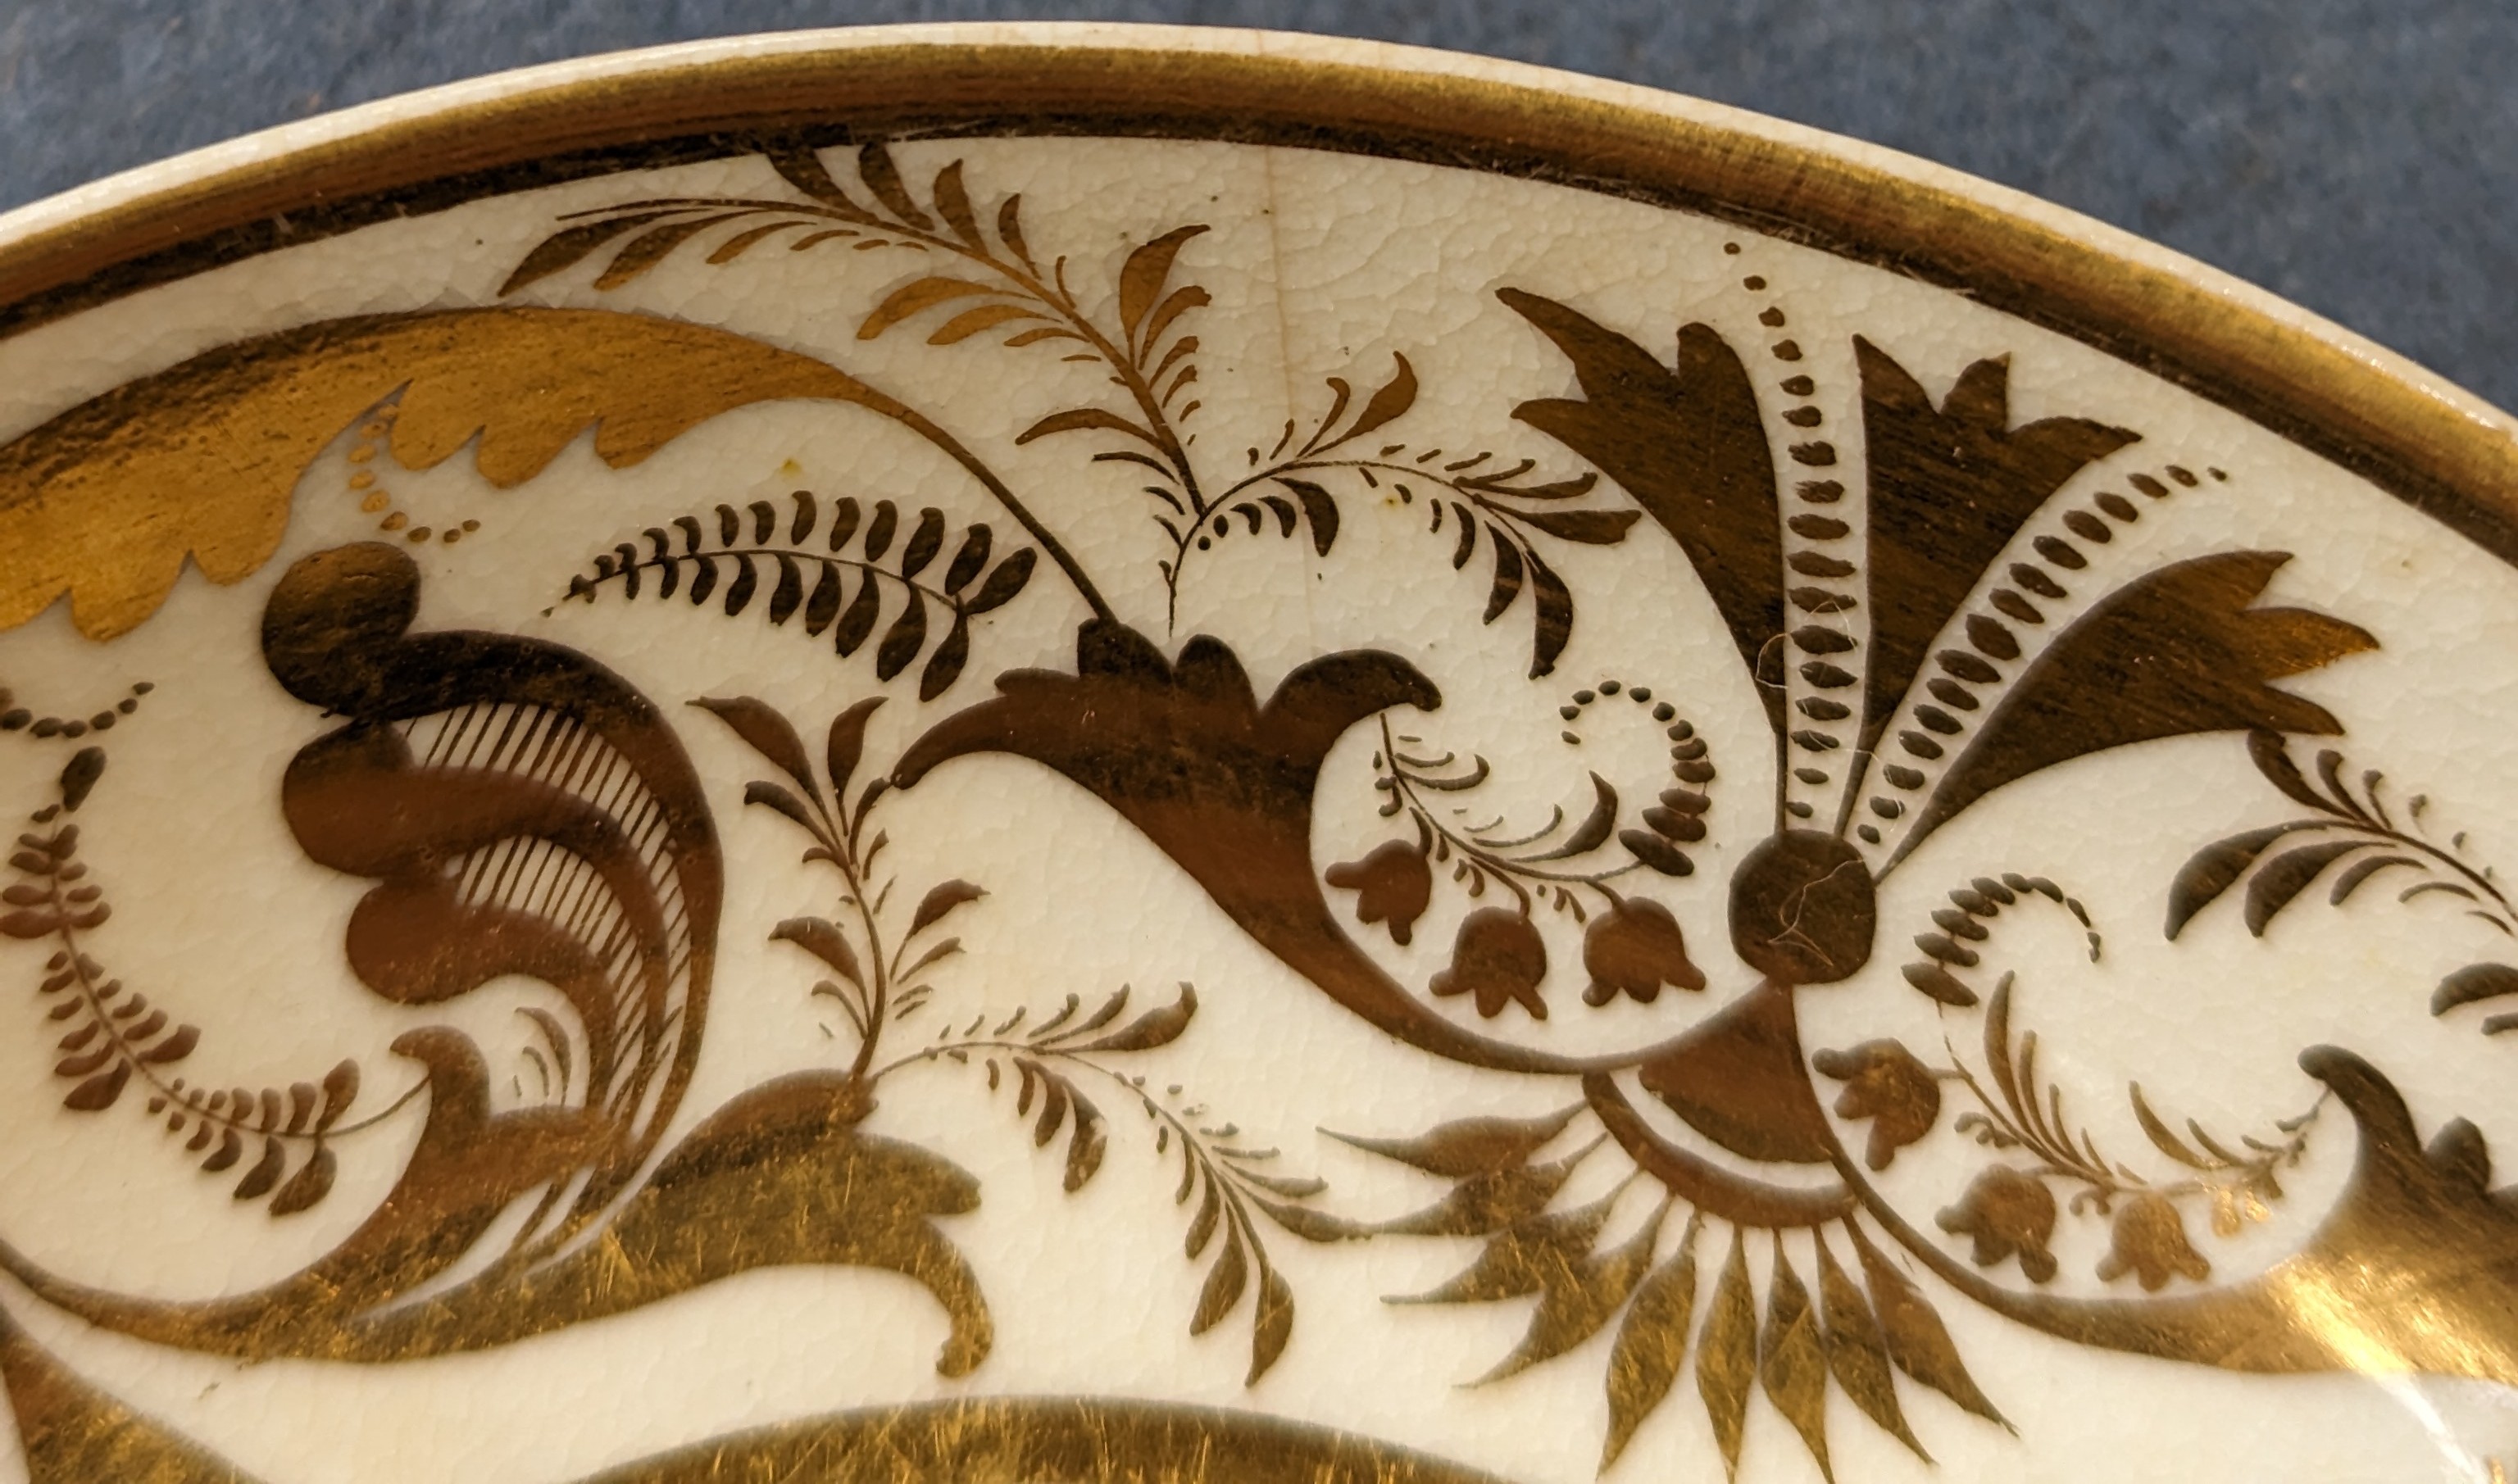 An early 19th century Derby named view teacup, coffee cup and saucer, the cups hand painted with a - Image 5 of 12